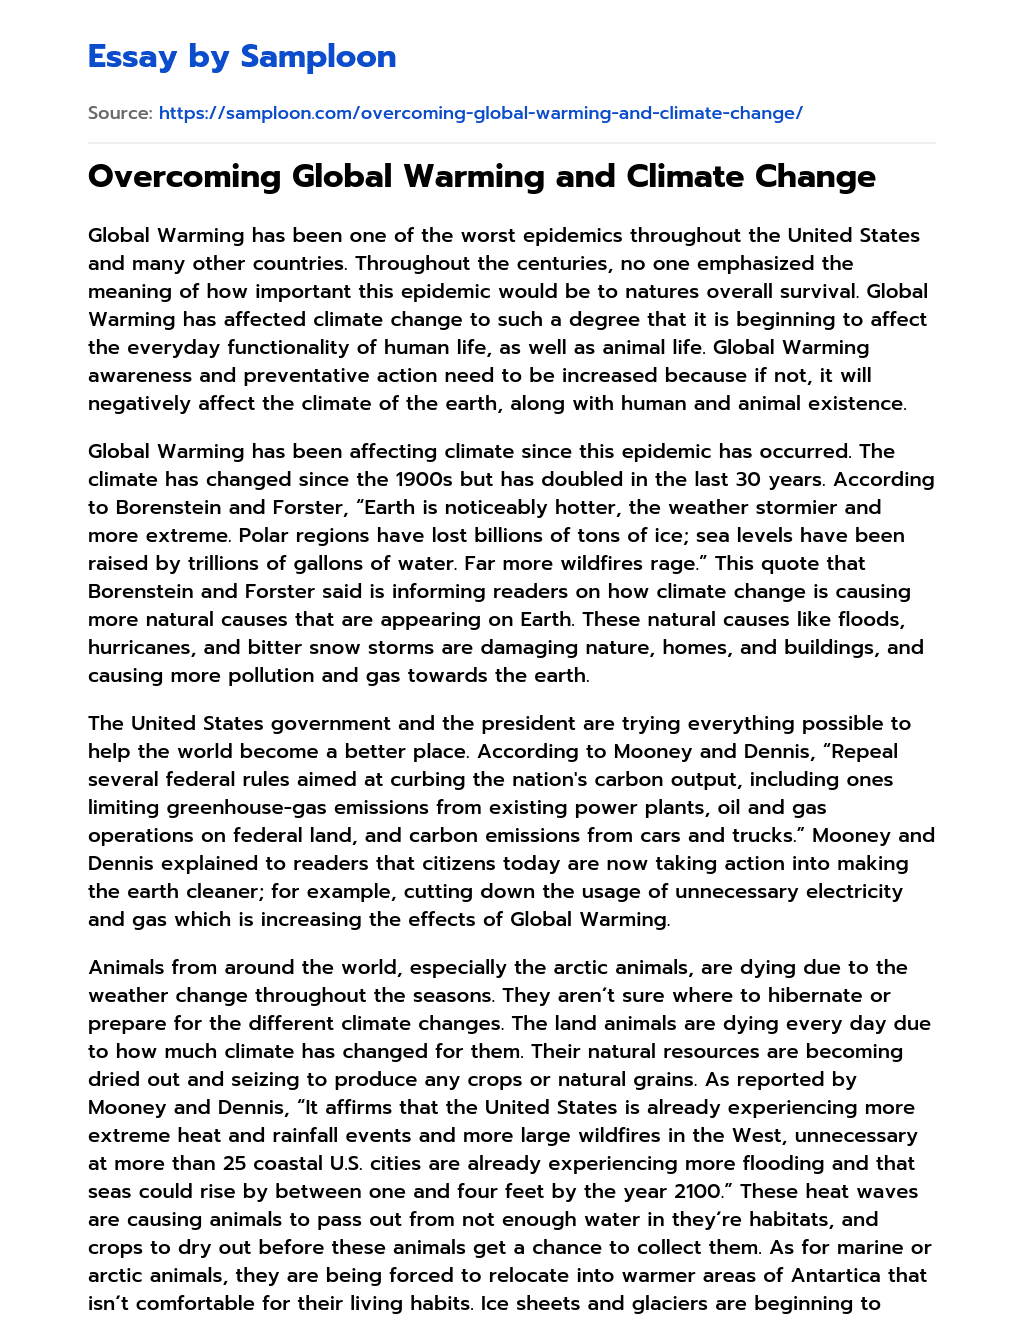 global climate change essay pte